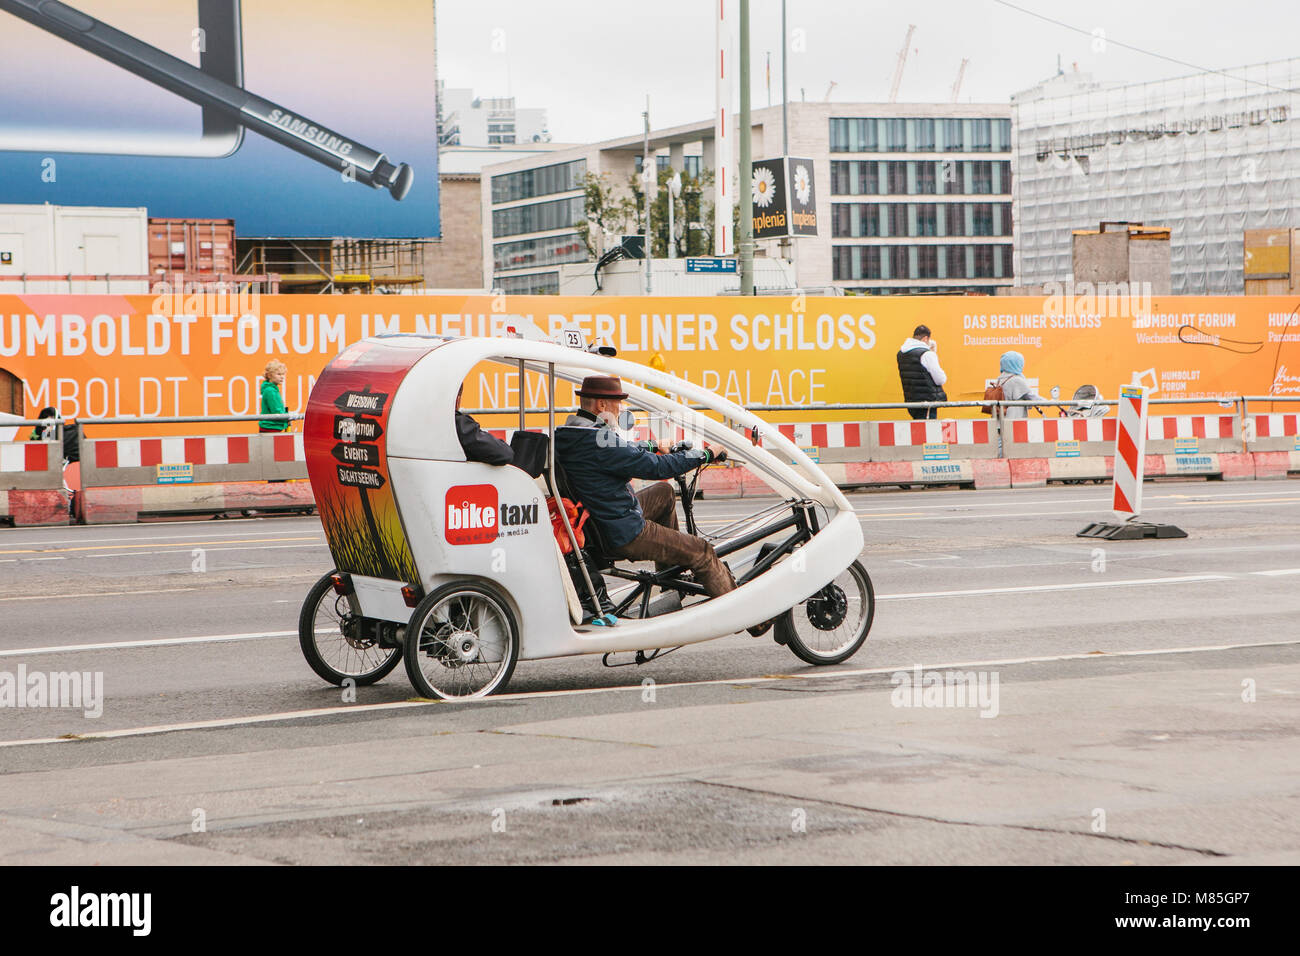 Berlin, October 1, 2017: Unknown elderly bike taxi driver carries passenger on road past people and advertising banners Stock Photo